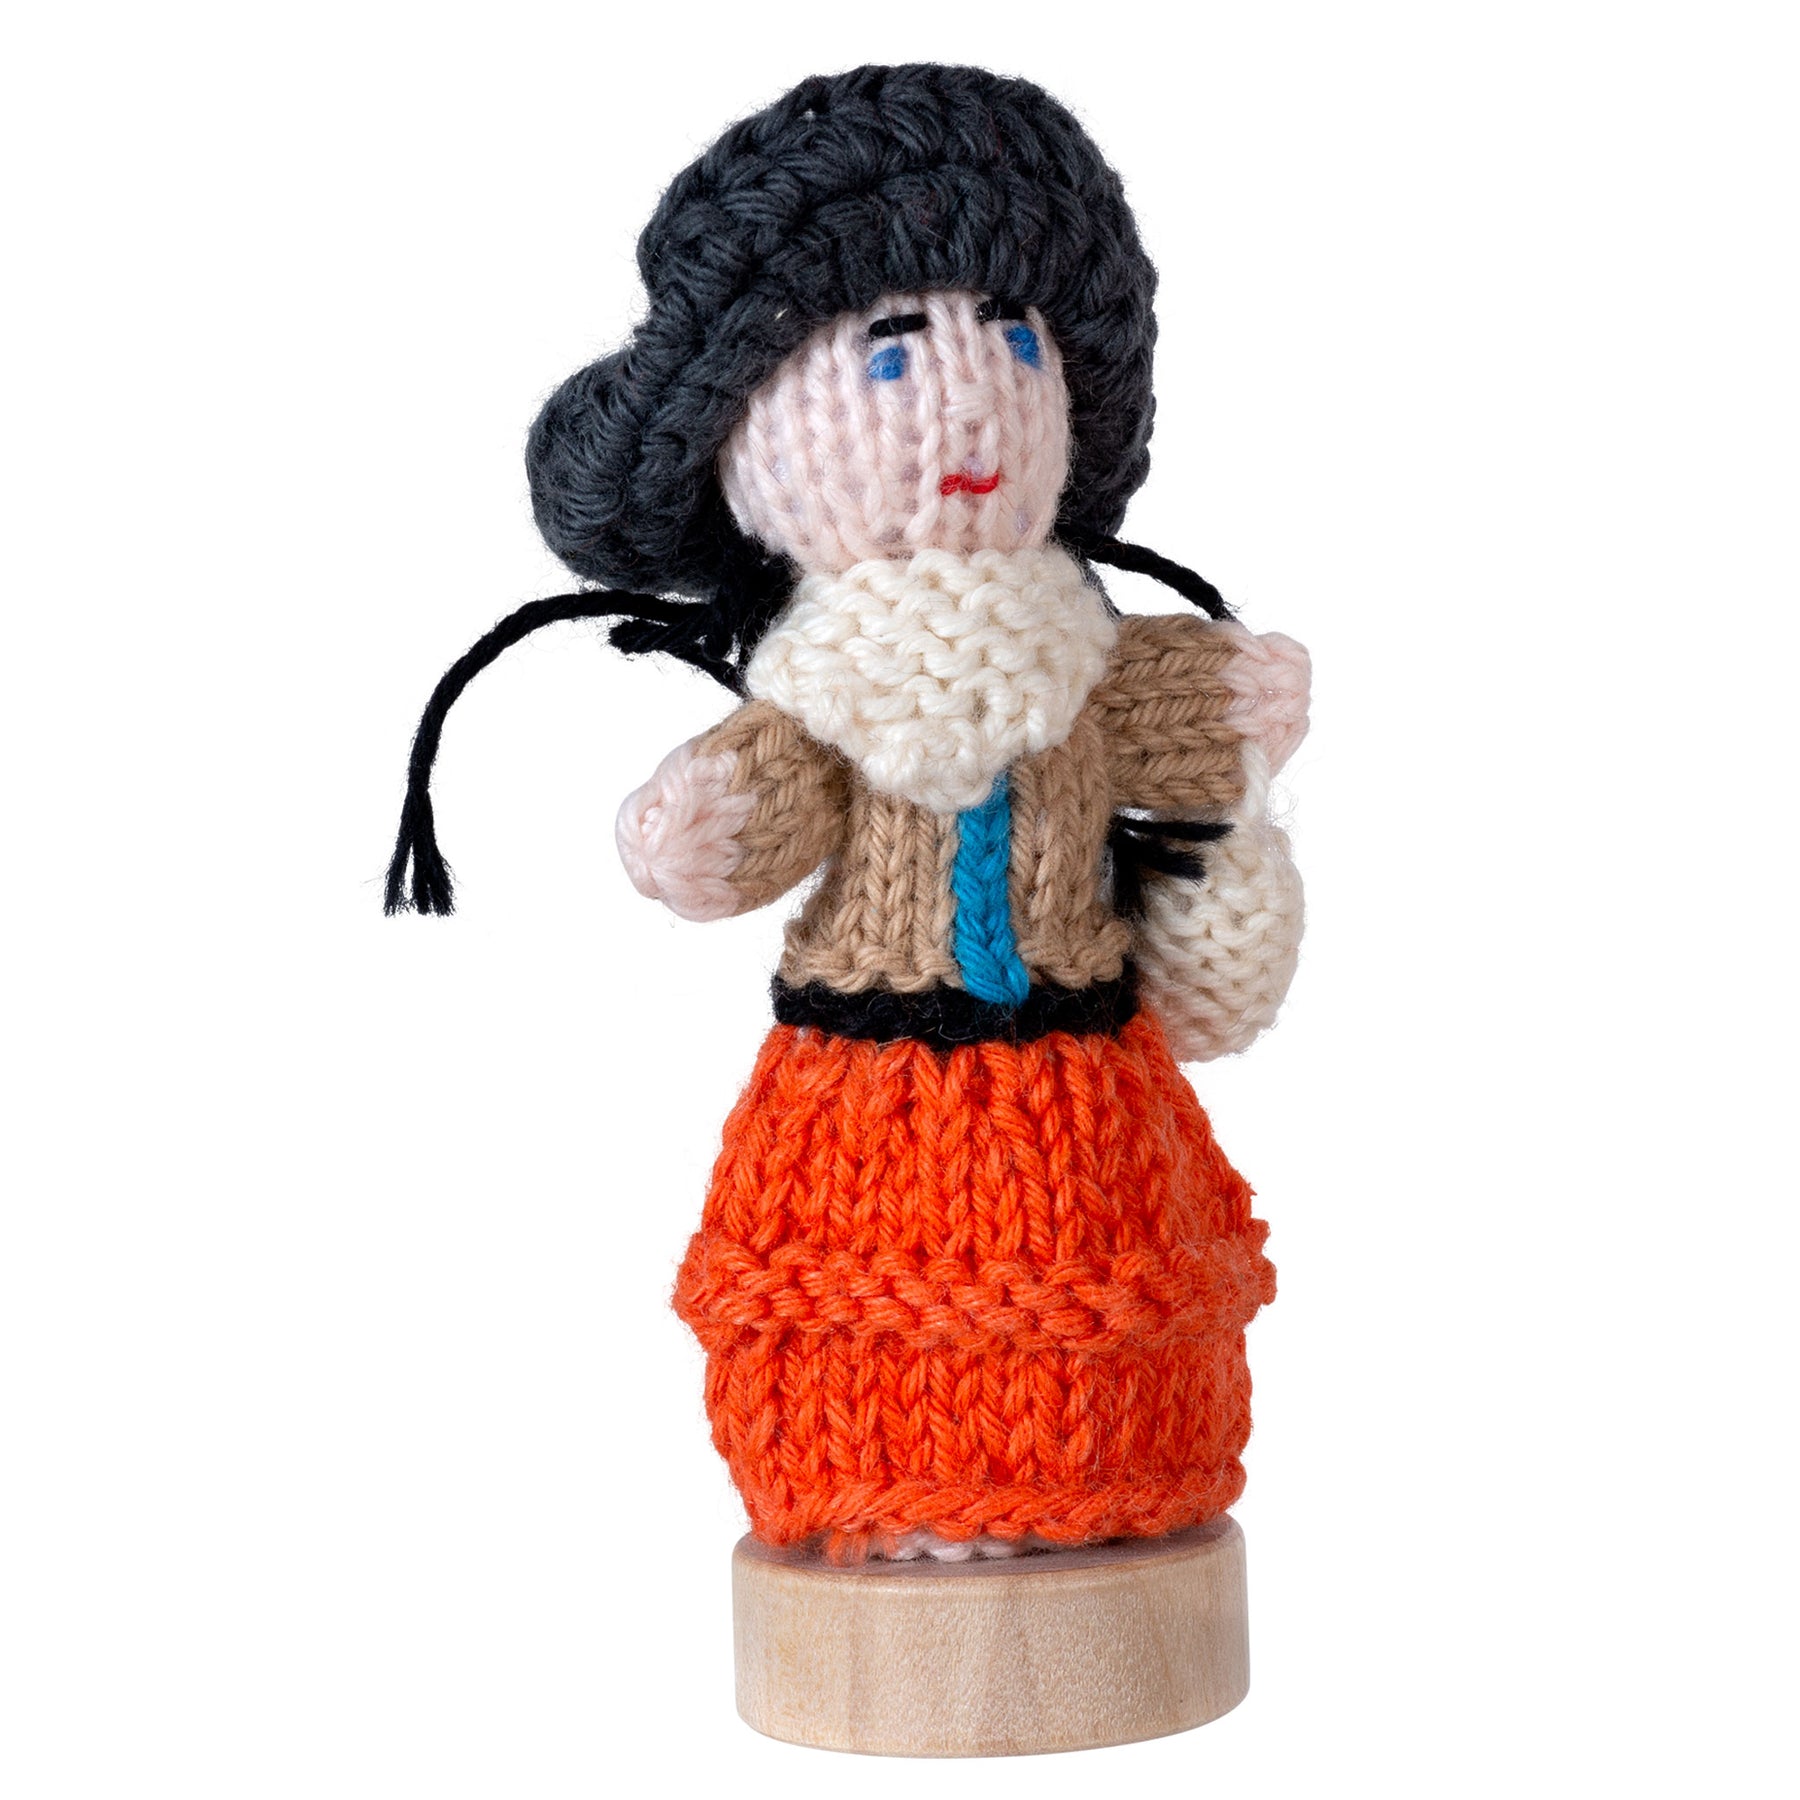 Cowgirl - Bright Organic Cotton Finger Puppet